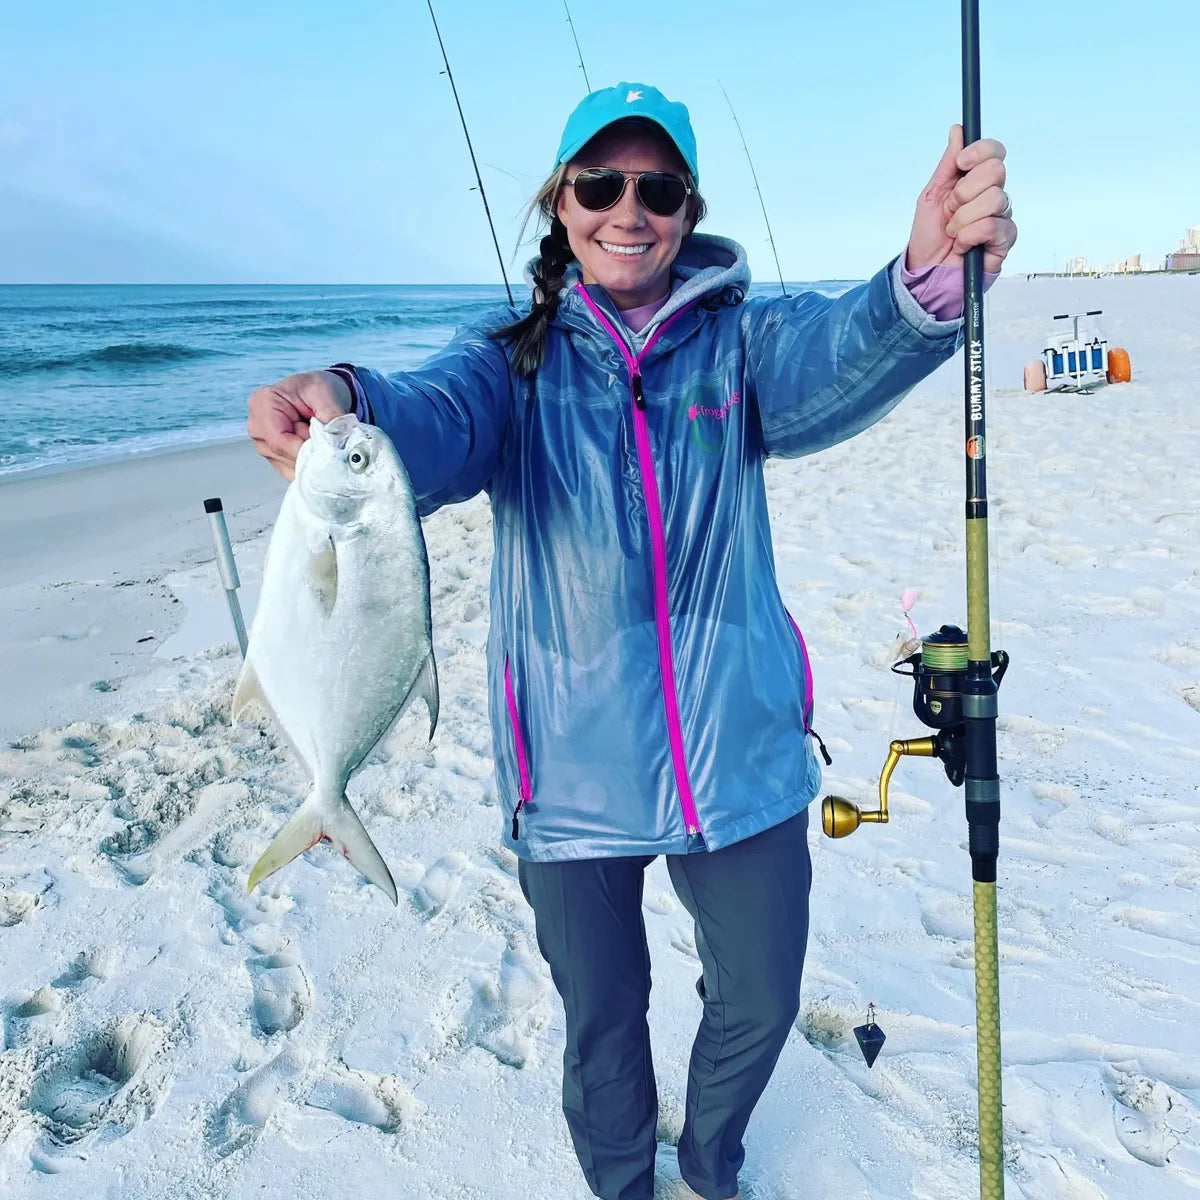 Surf Fishing Rods at Beach Bum Outdoors